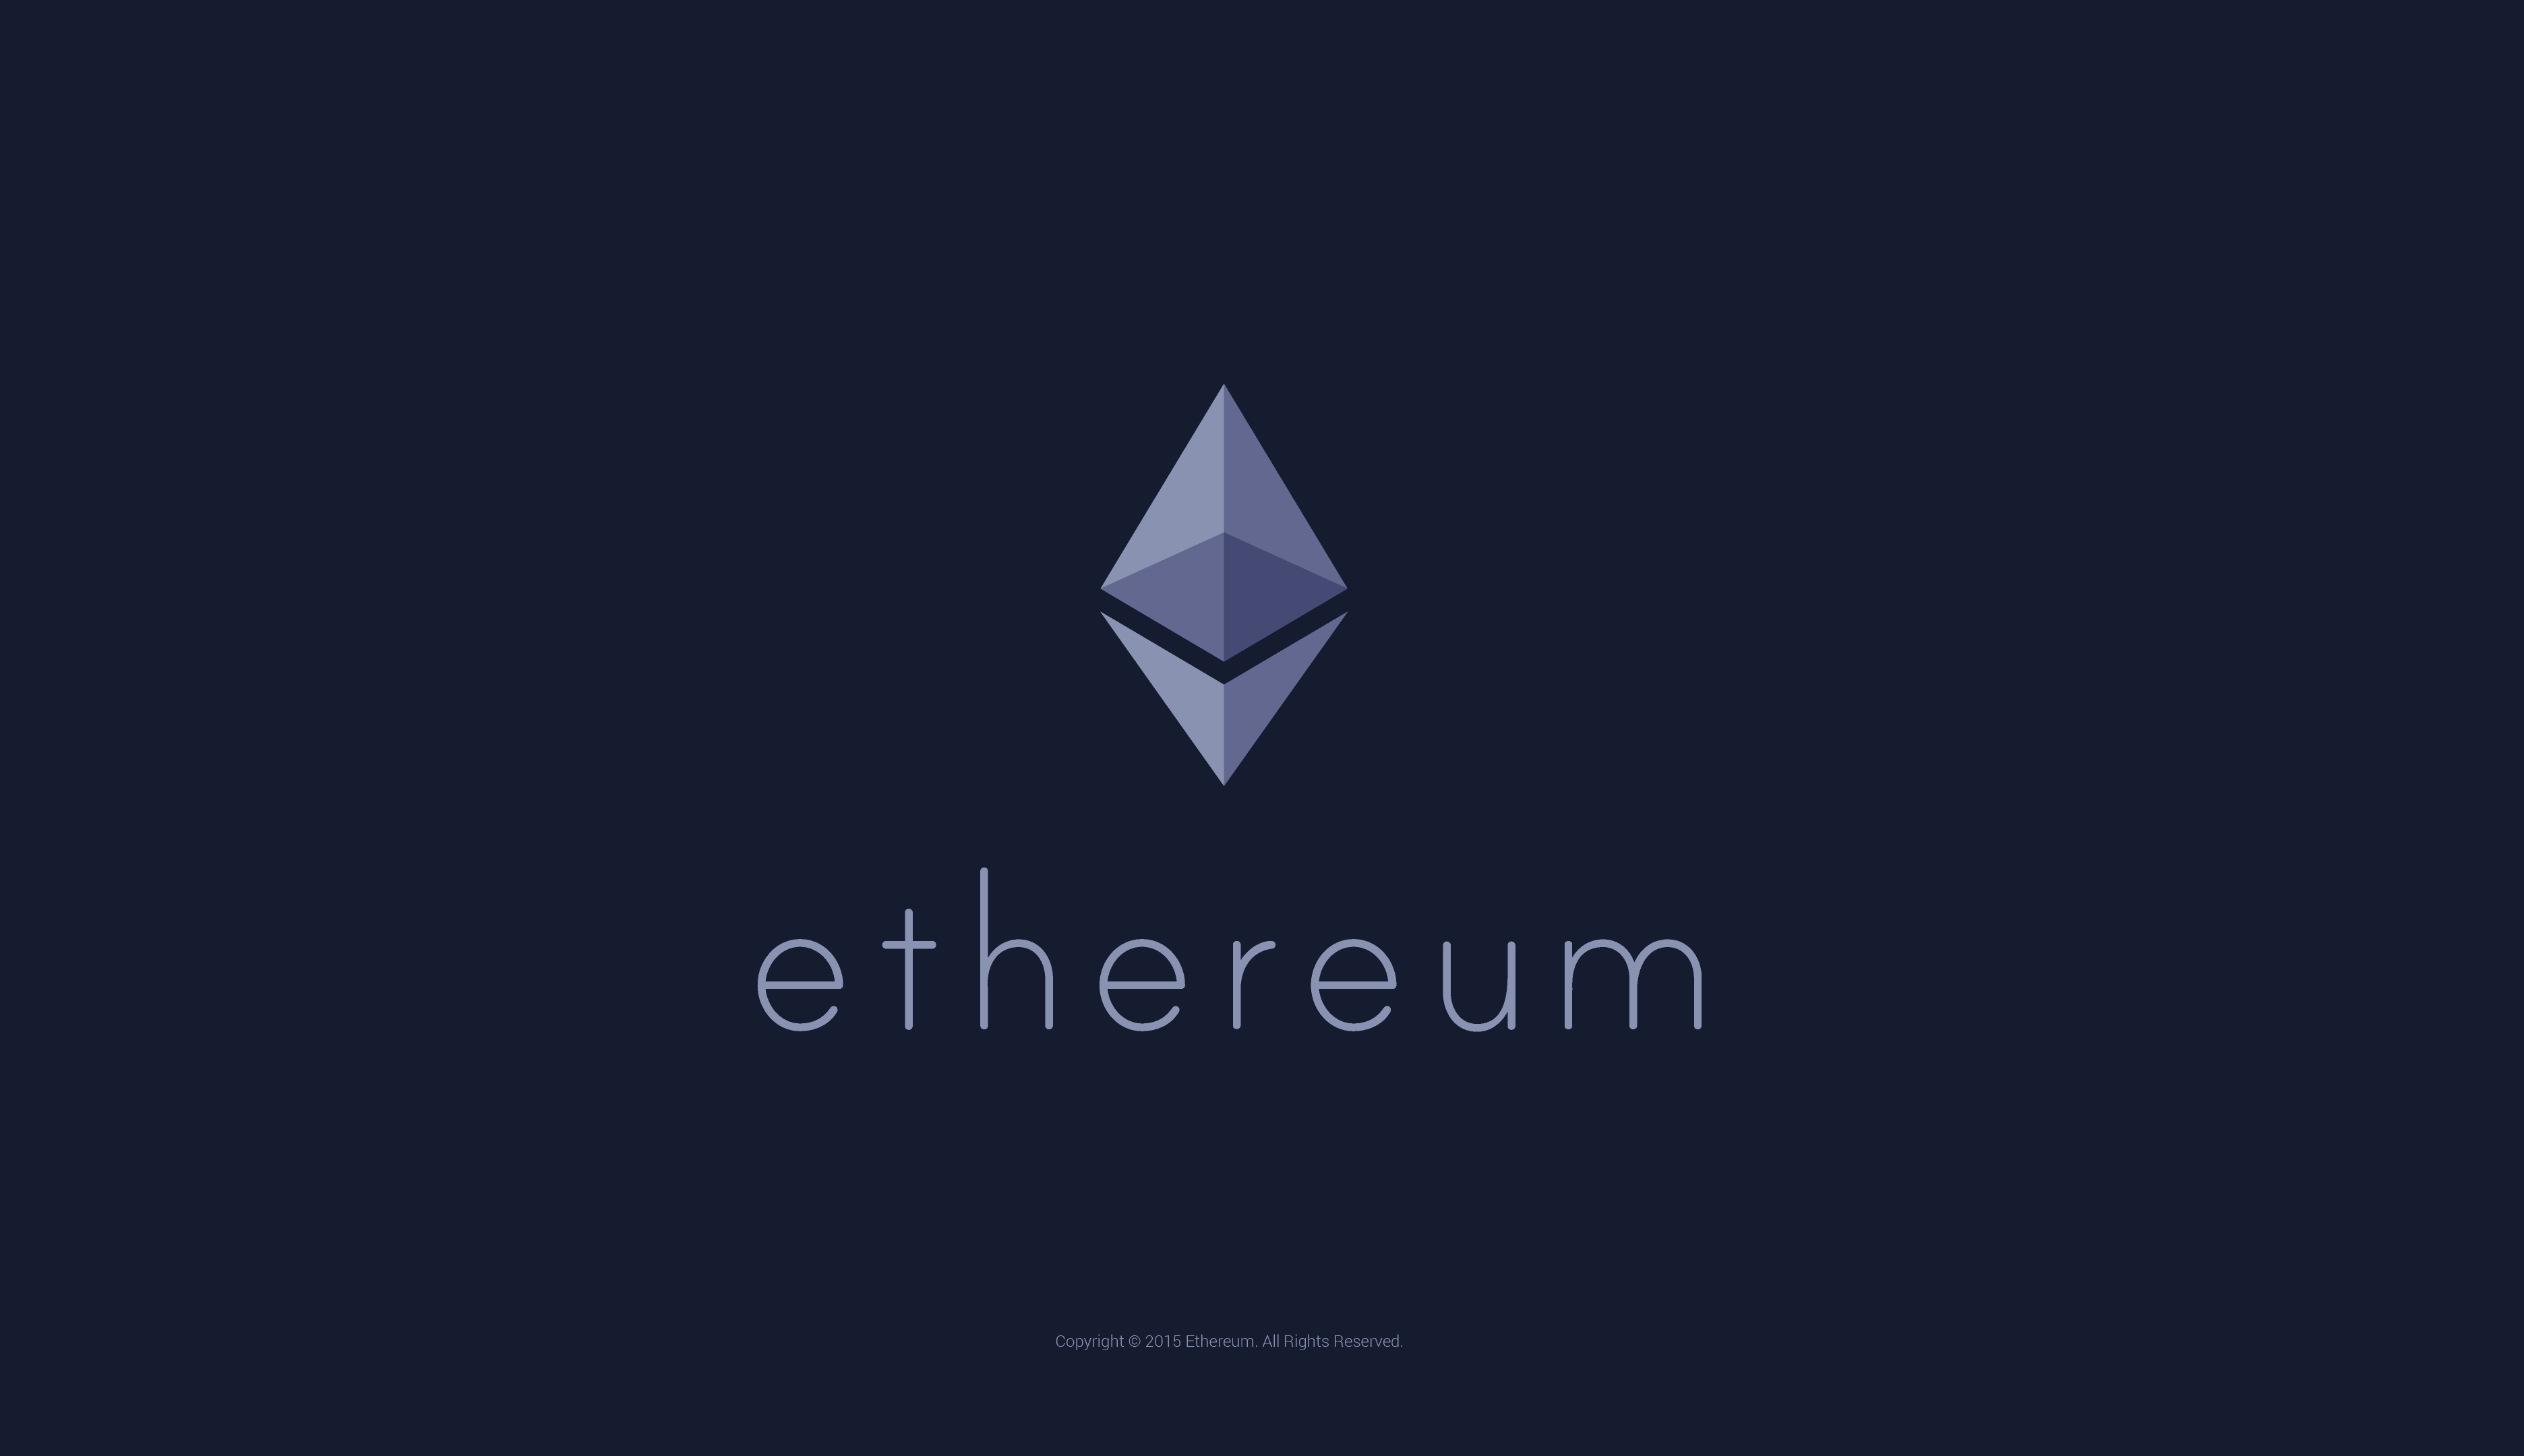 what makes ethereum special